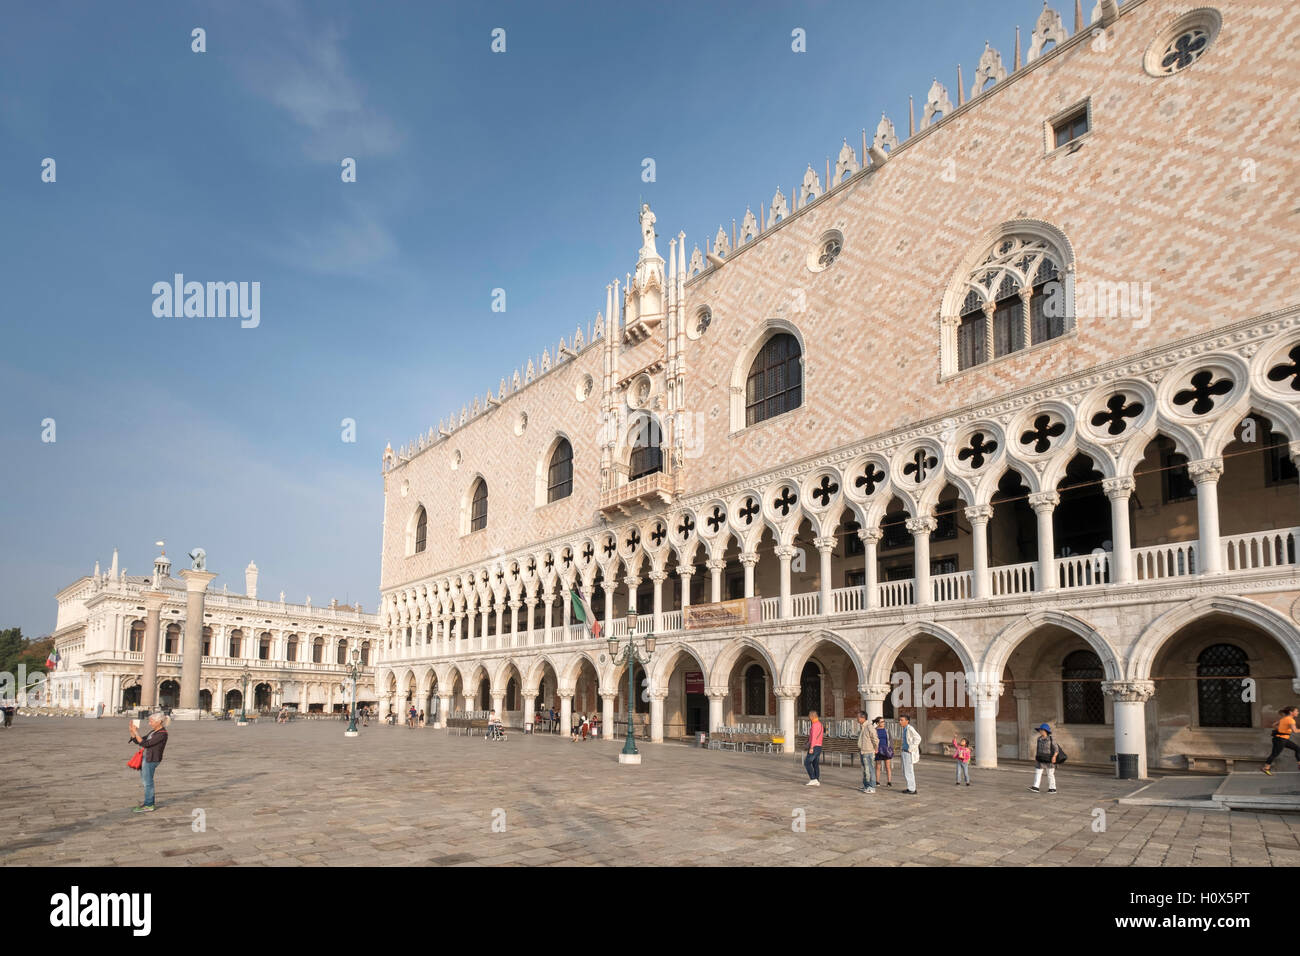 The Doge's Palace, Palazzo Ducale, Piazza San Marco, Venice Italy.Venetian Gothic style it was the seat of Venetian Government Stock Photo